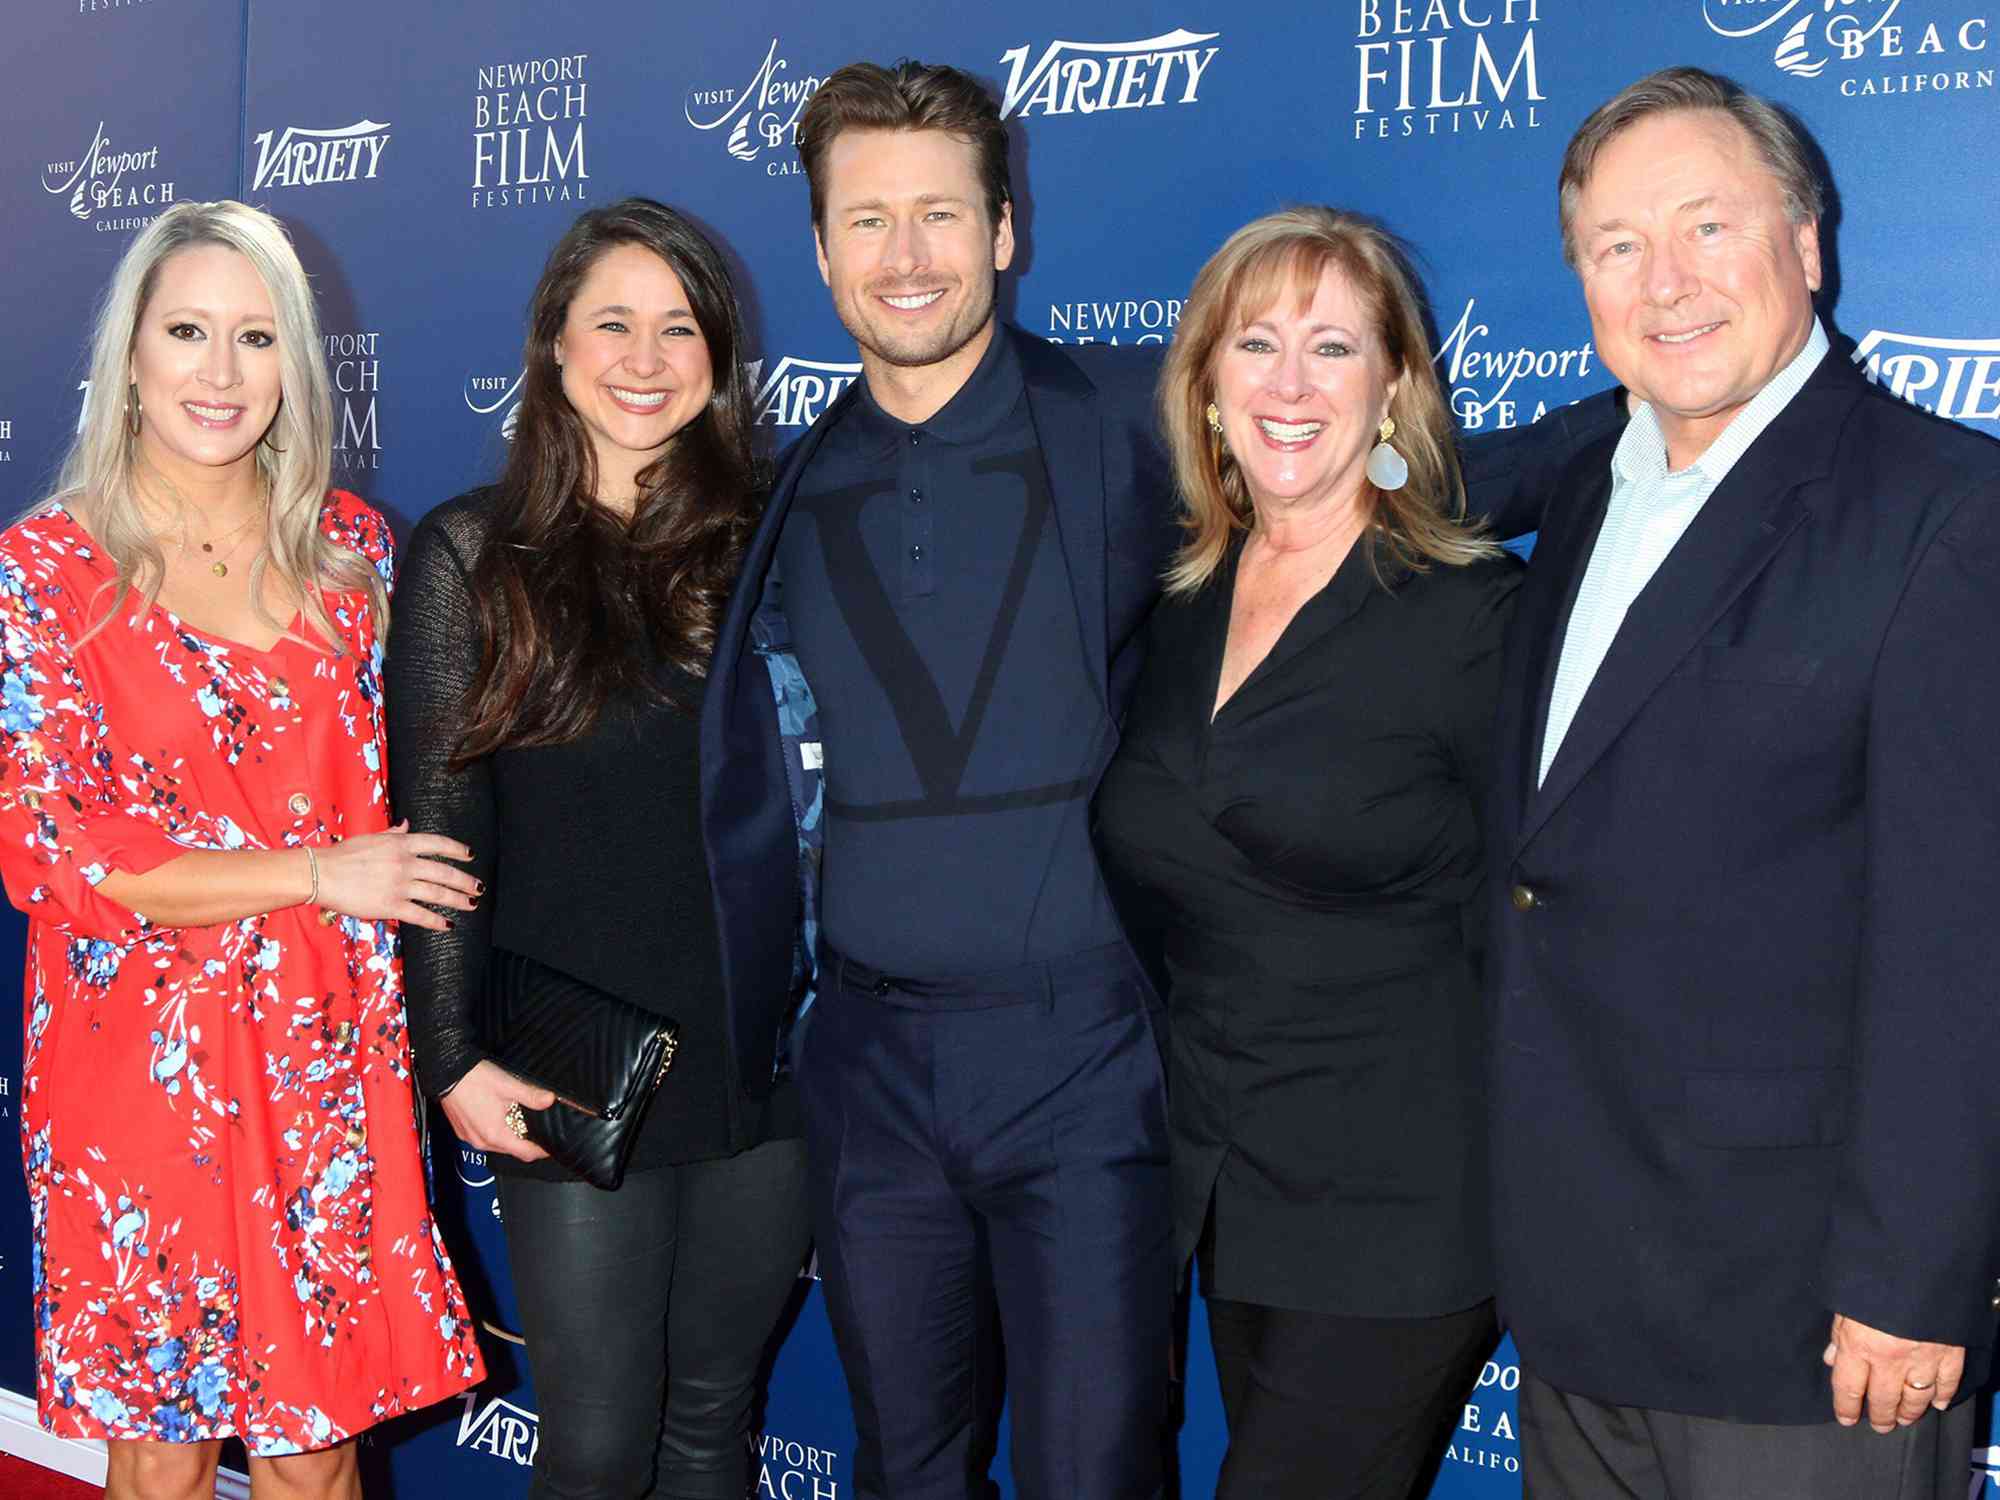 Glen Powell and his family at the Newport Beach Film Festival Honors Featuring Variety 10 Actors To Watch on November 3, 2019.